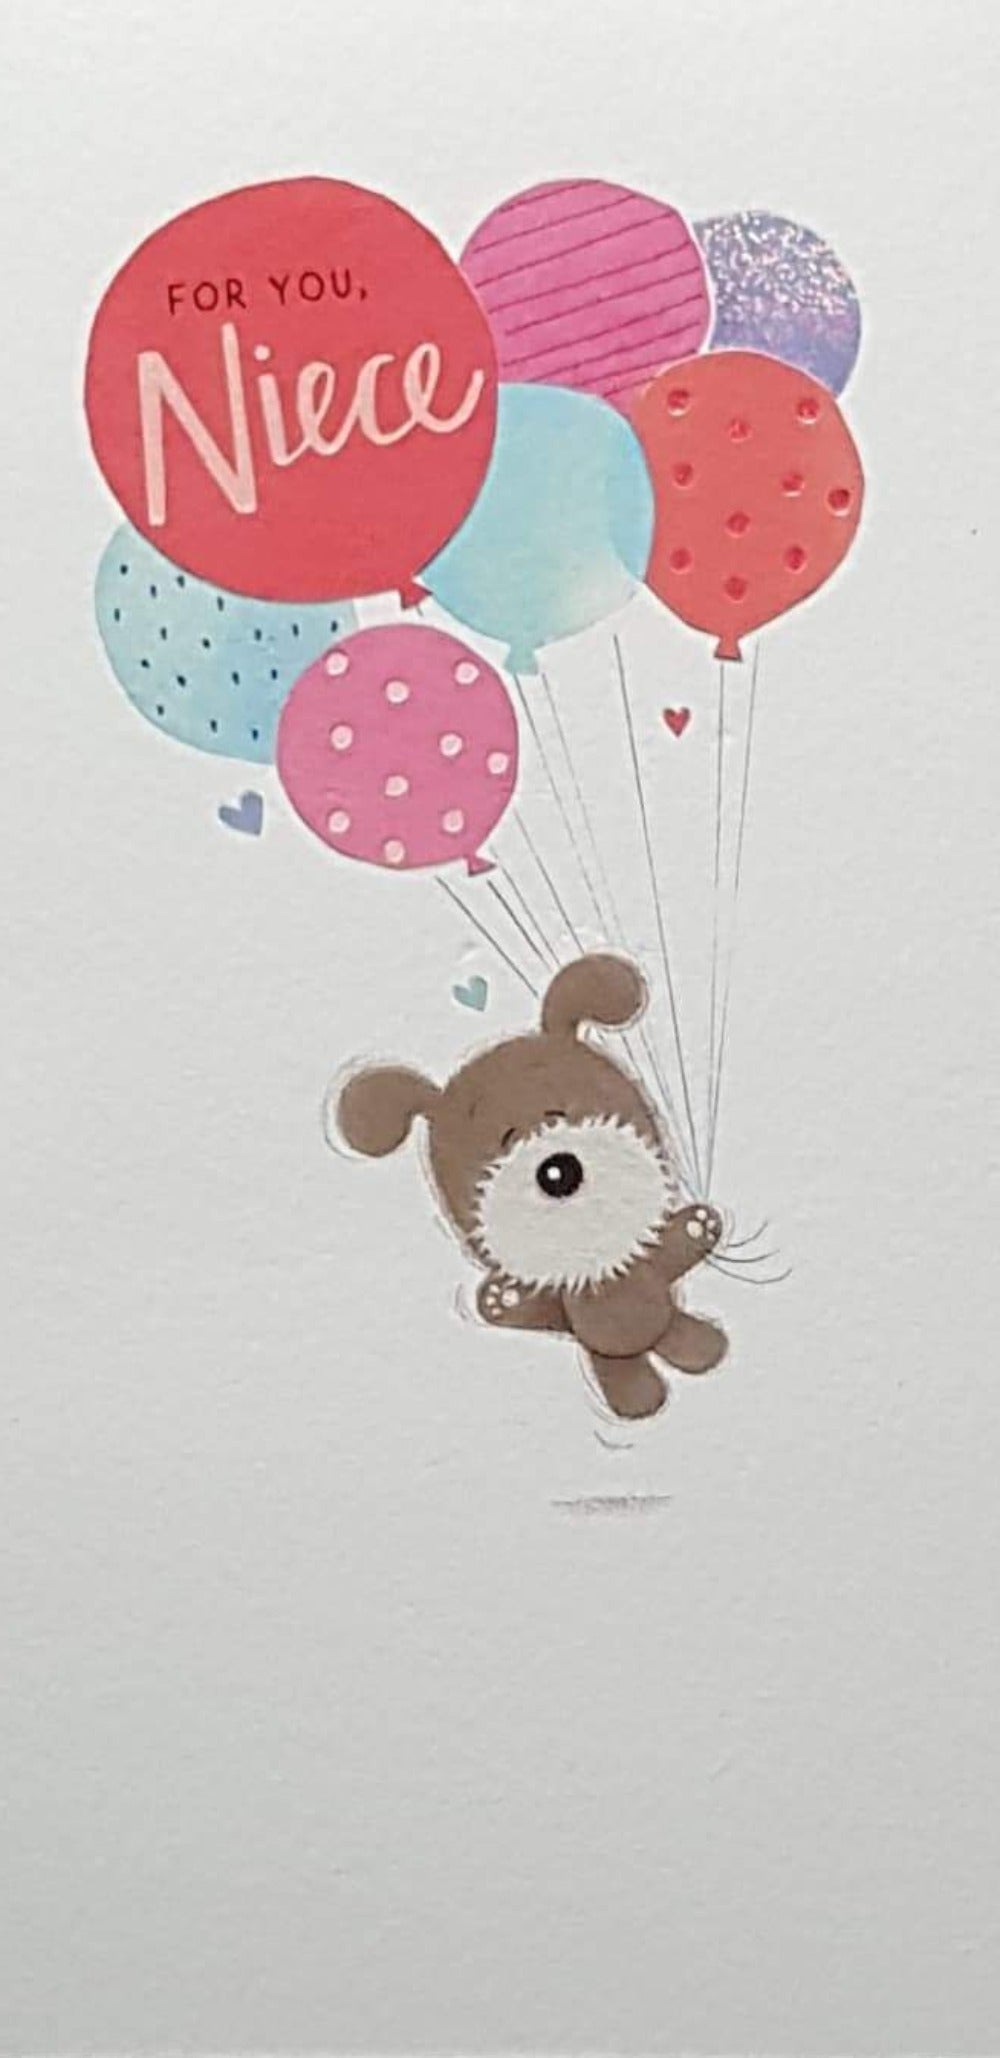 Birthday Card - Niece / A Dog Flying With Balloons